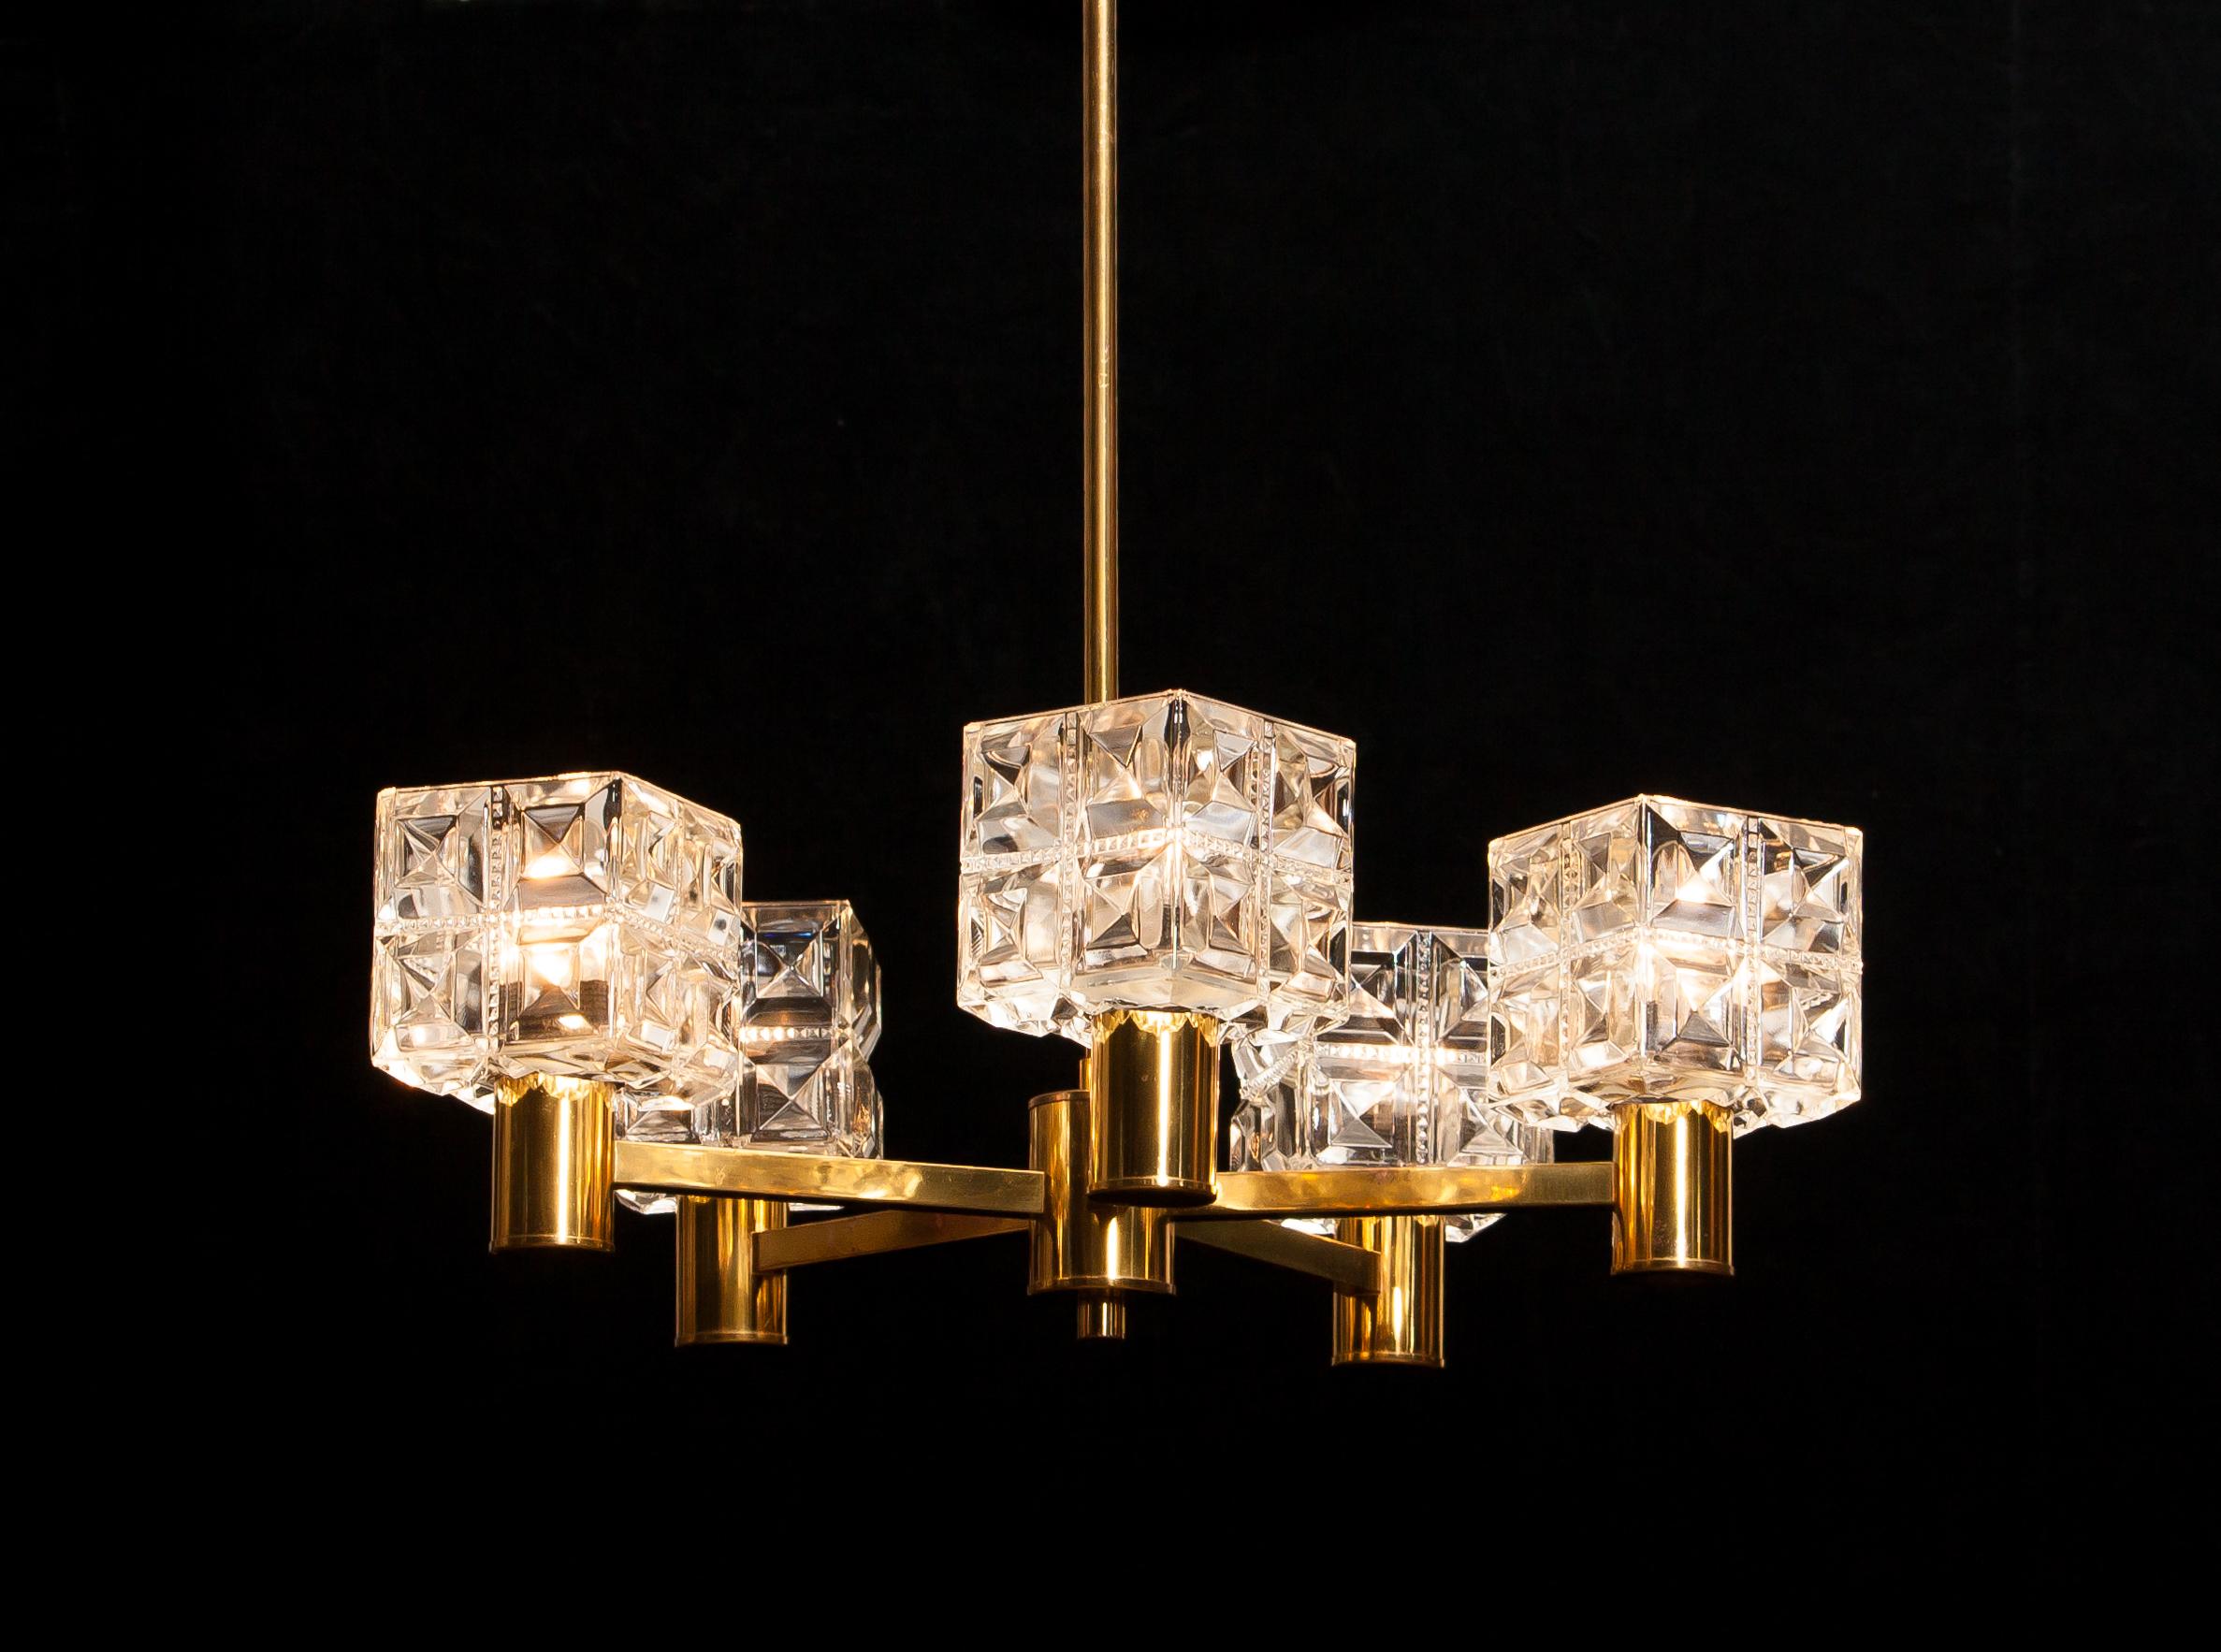 Beautiful chandelier made by Tyringe Konsthantverk, Sweden.
This lamp is made of five brass arms with glass shades.
It is in a very nice condition.
Period 1950s.
Dimensions: H 66 cm, ø 54 cm.
    